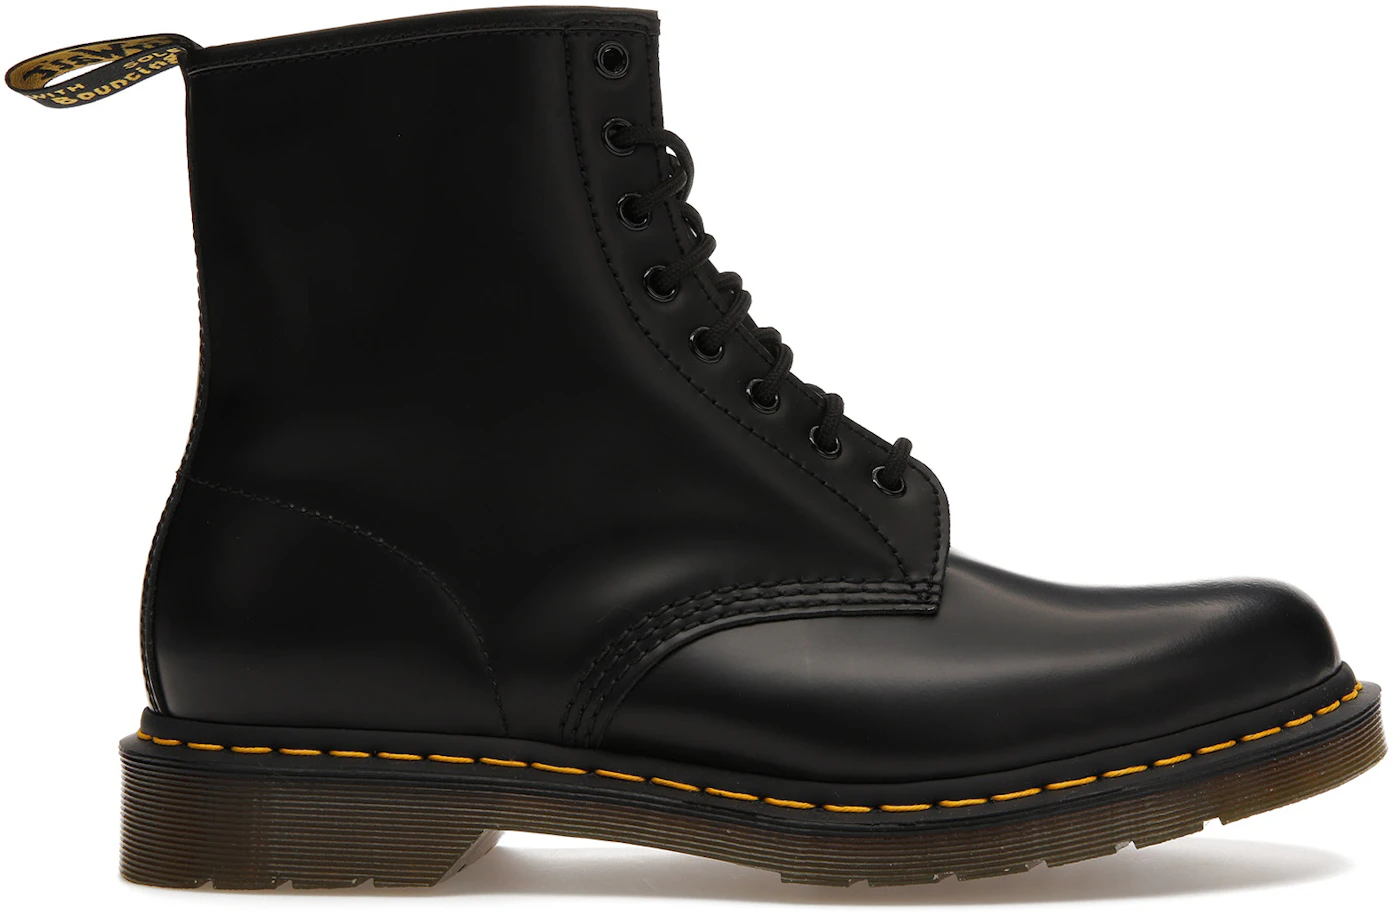 houding verbrand Ongeschikt Dr. Martens 1460 Smooth Leather Lace Up Boot Black Men's - 11822006 - US